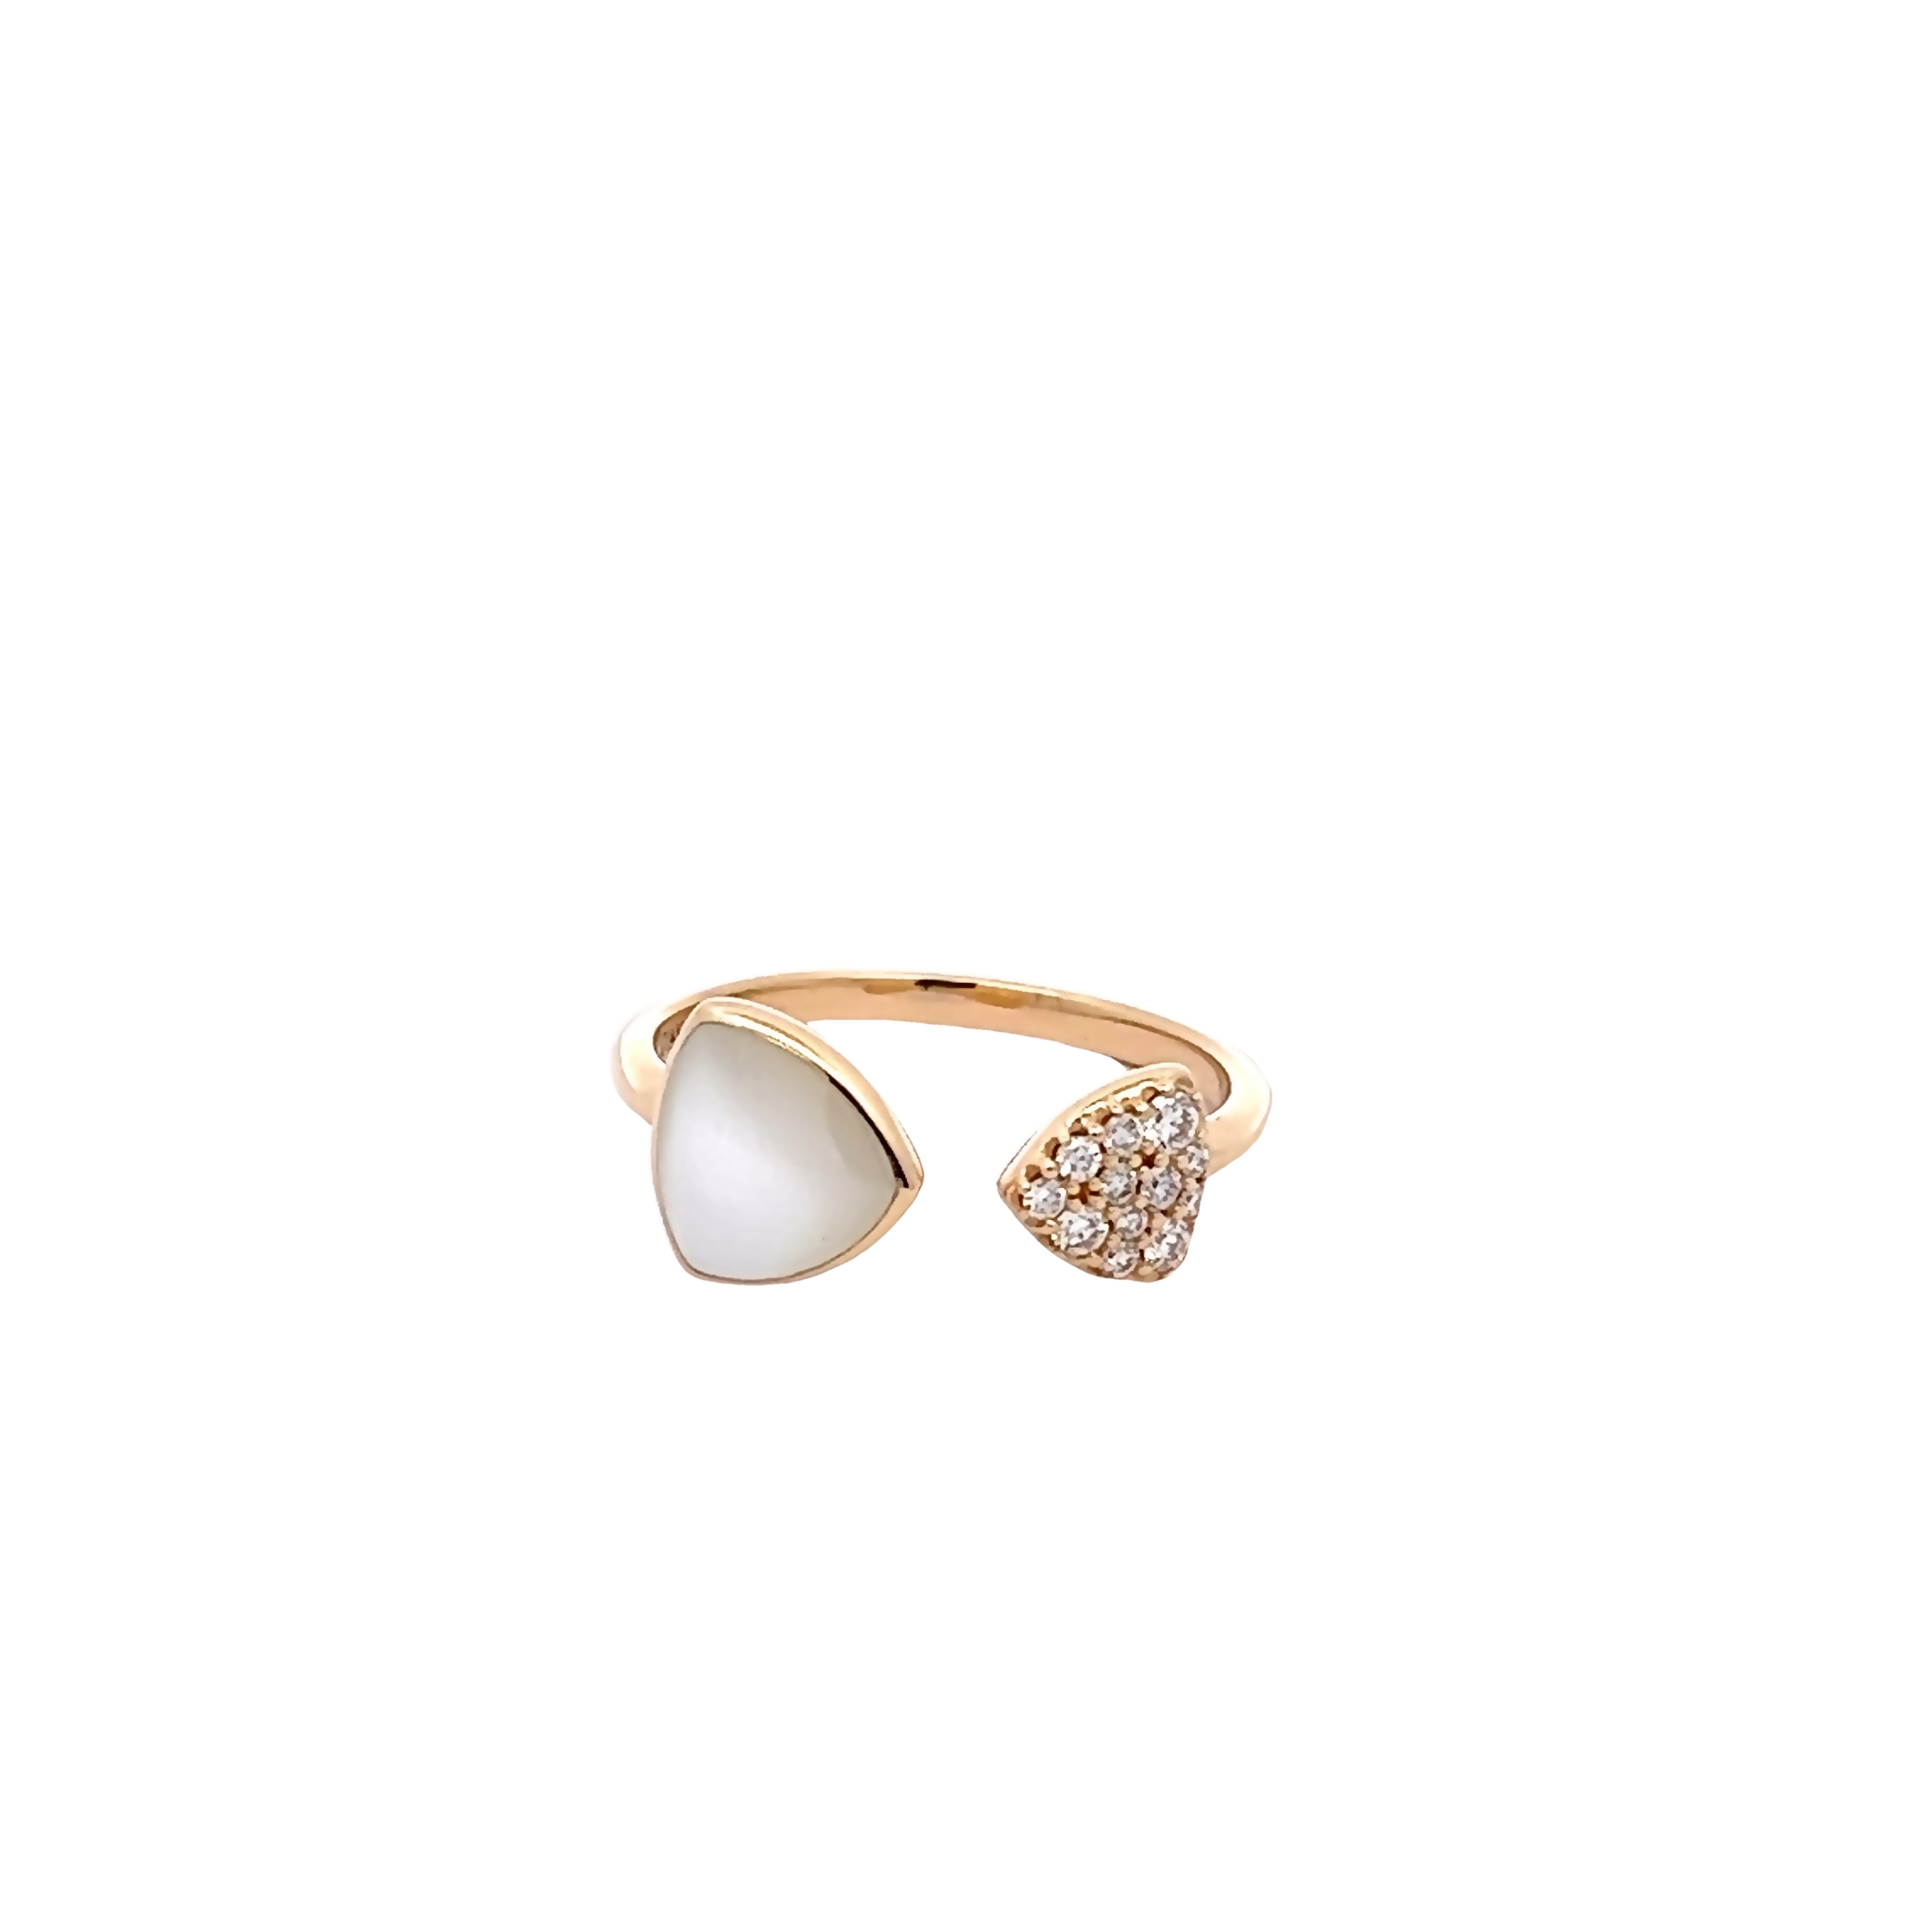 14 Karat yellow gold ring with 12=0.16 total weight round brilliant G VS Diamonds and white Mother of Pearl inlay. Size 8.